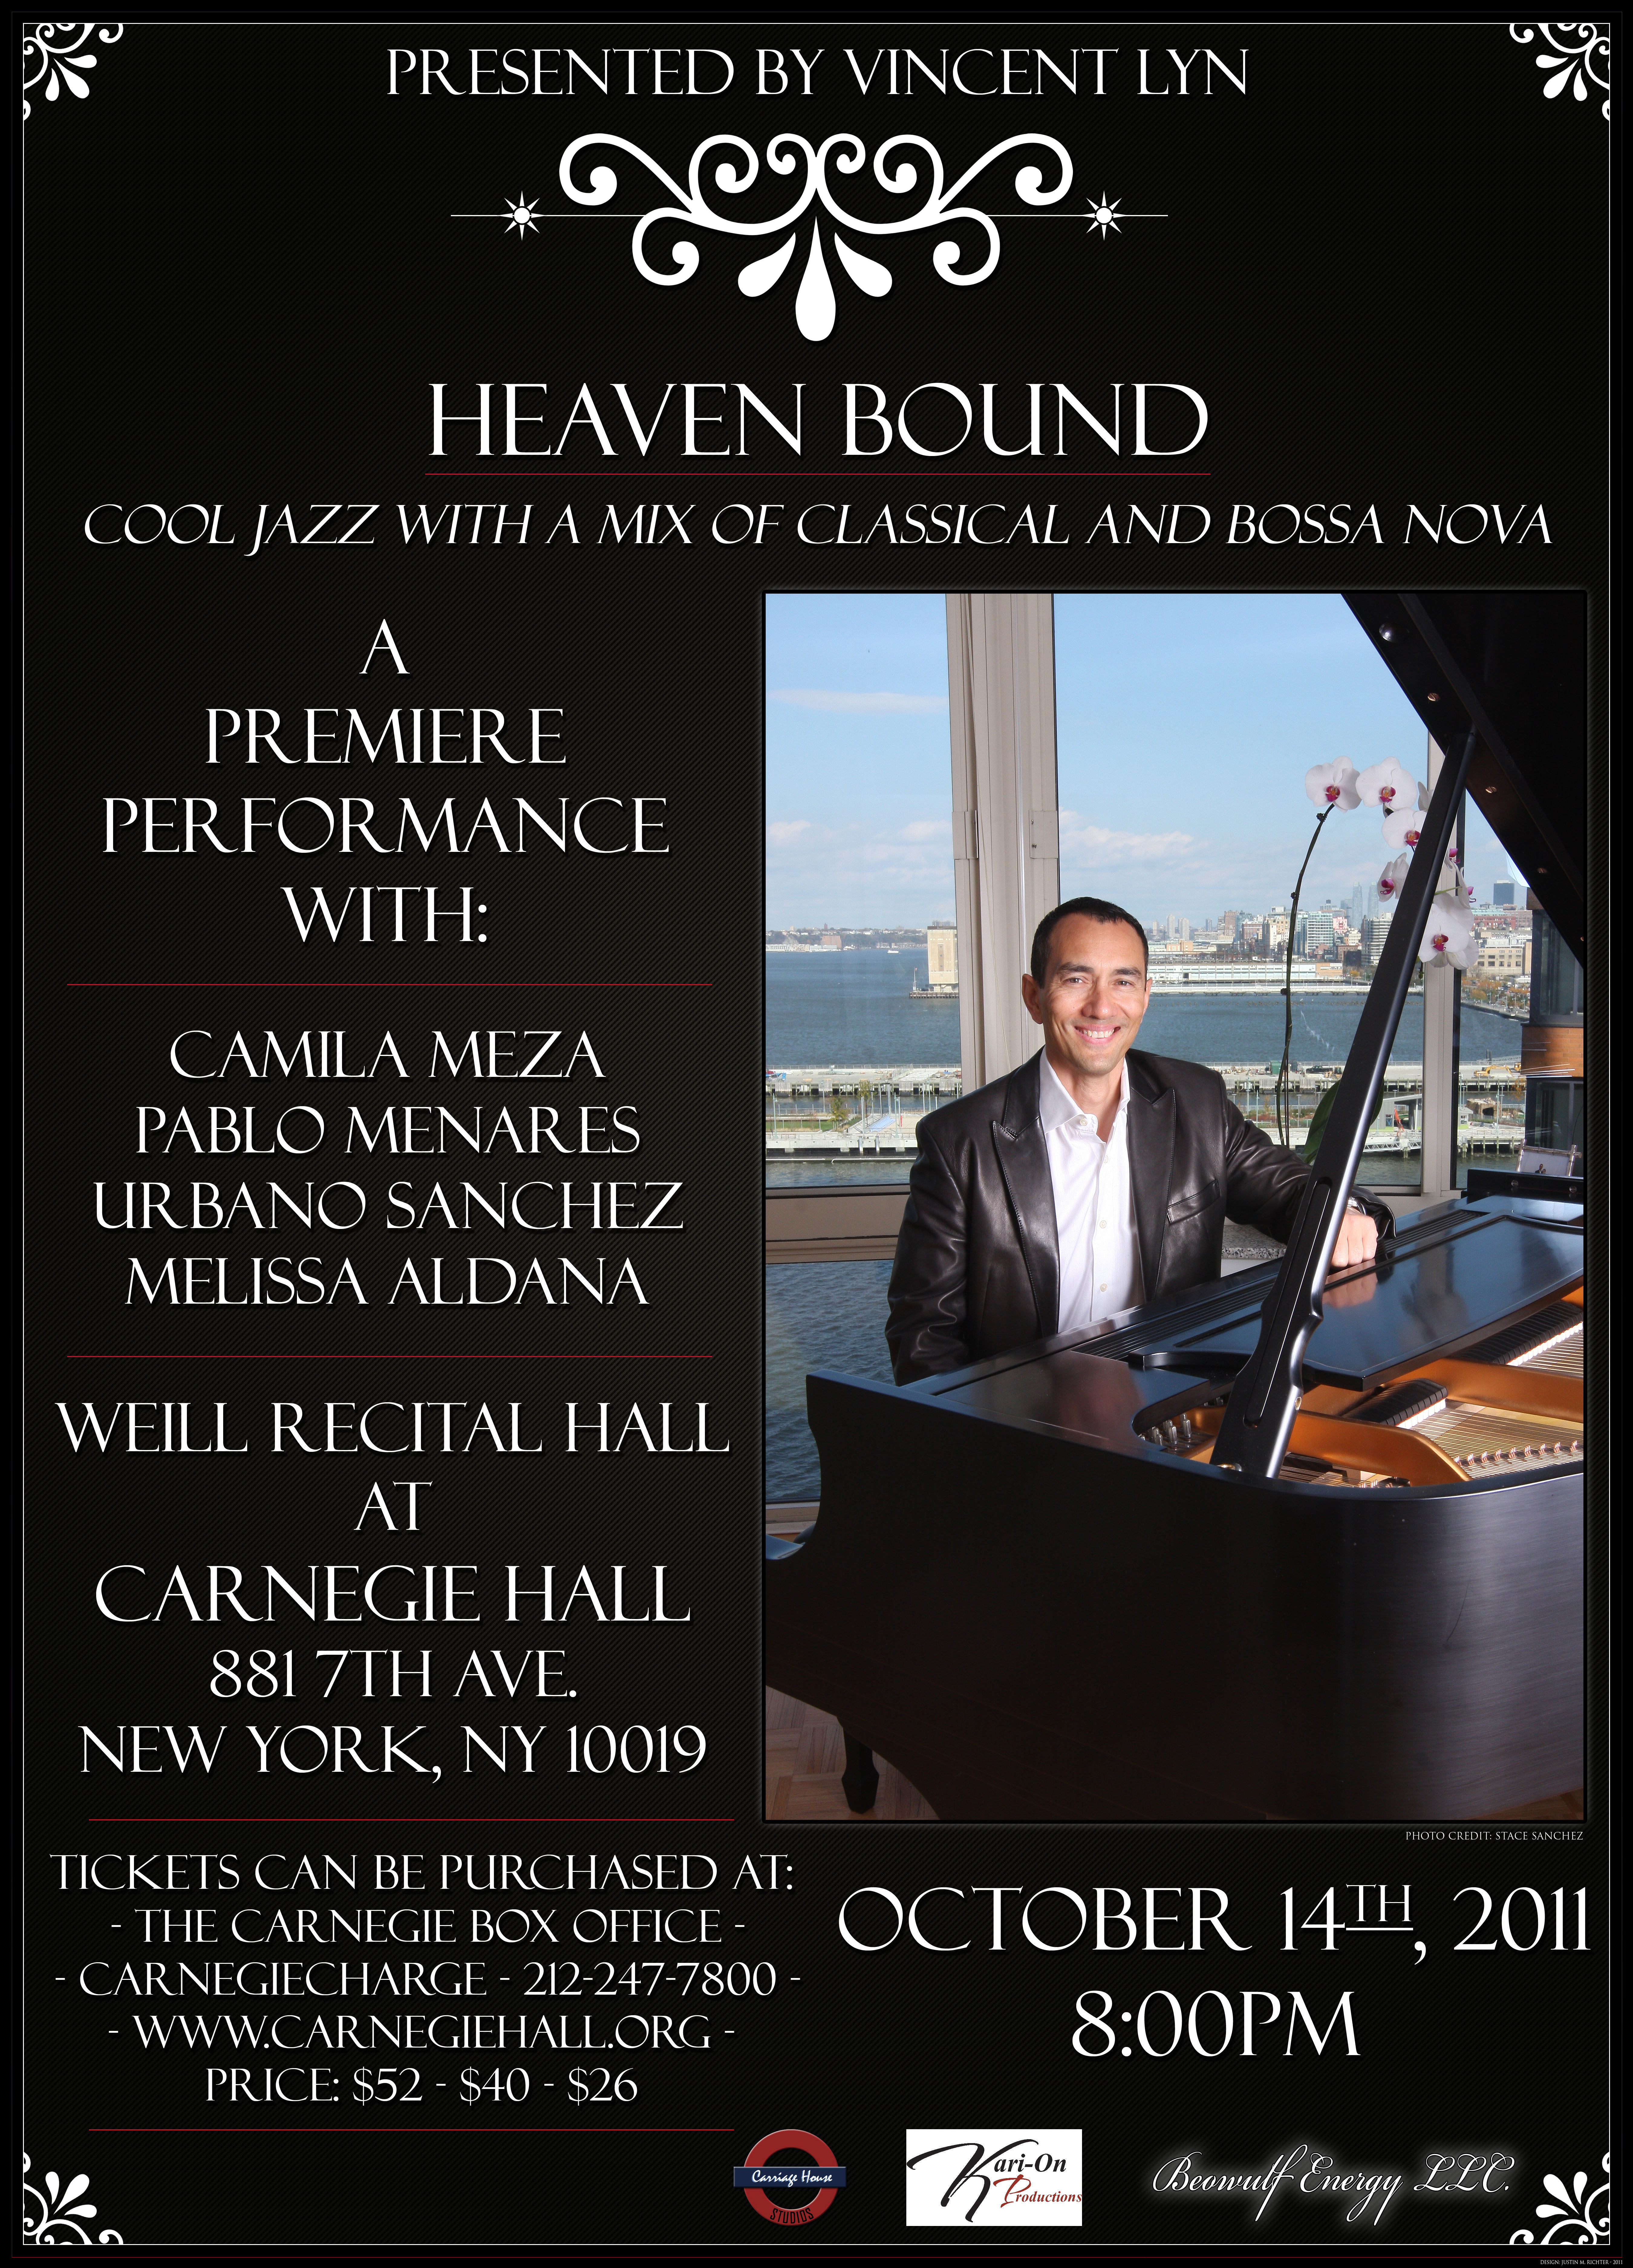 Vincent Lyn debut concert at Carnegie Hall. October 14th, 2011 Sold out performance!